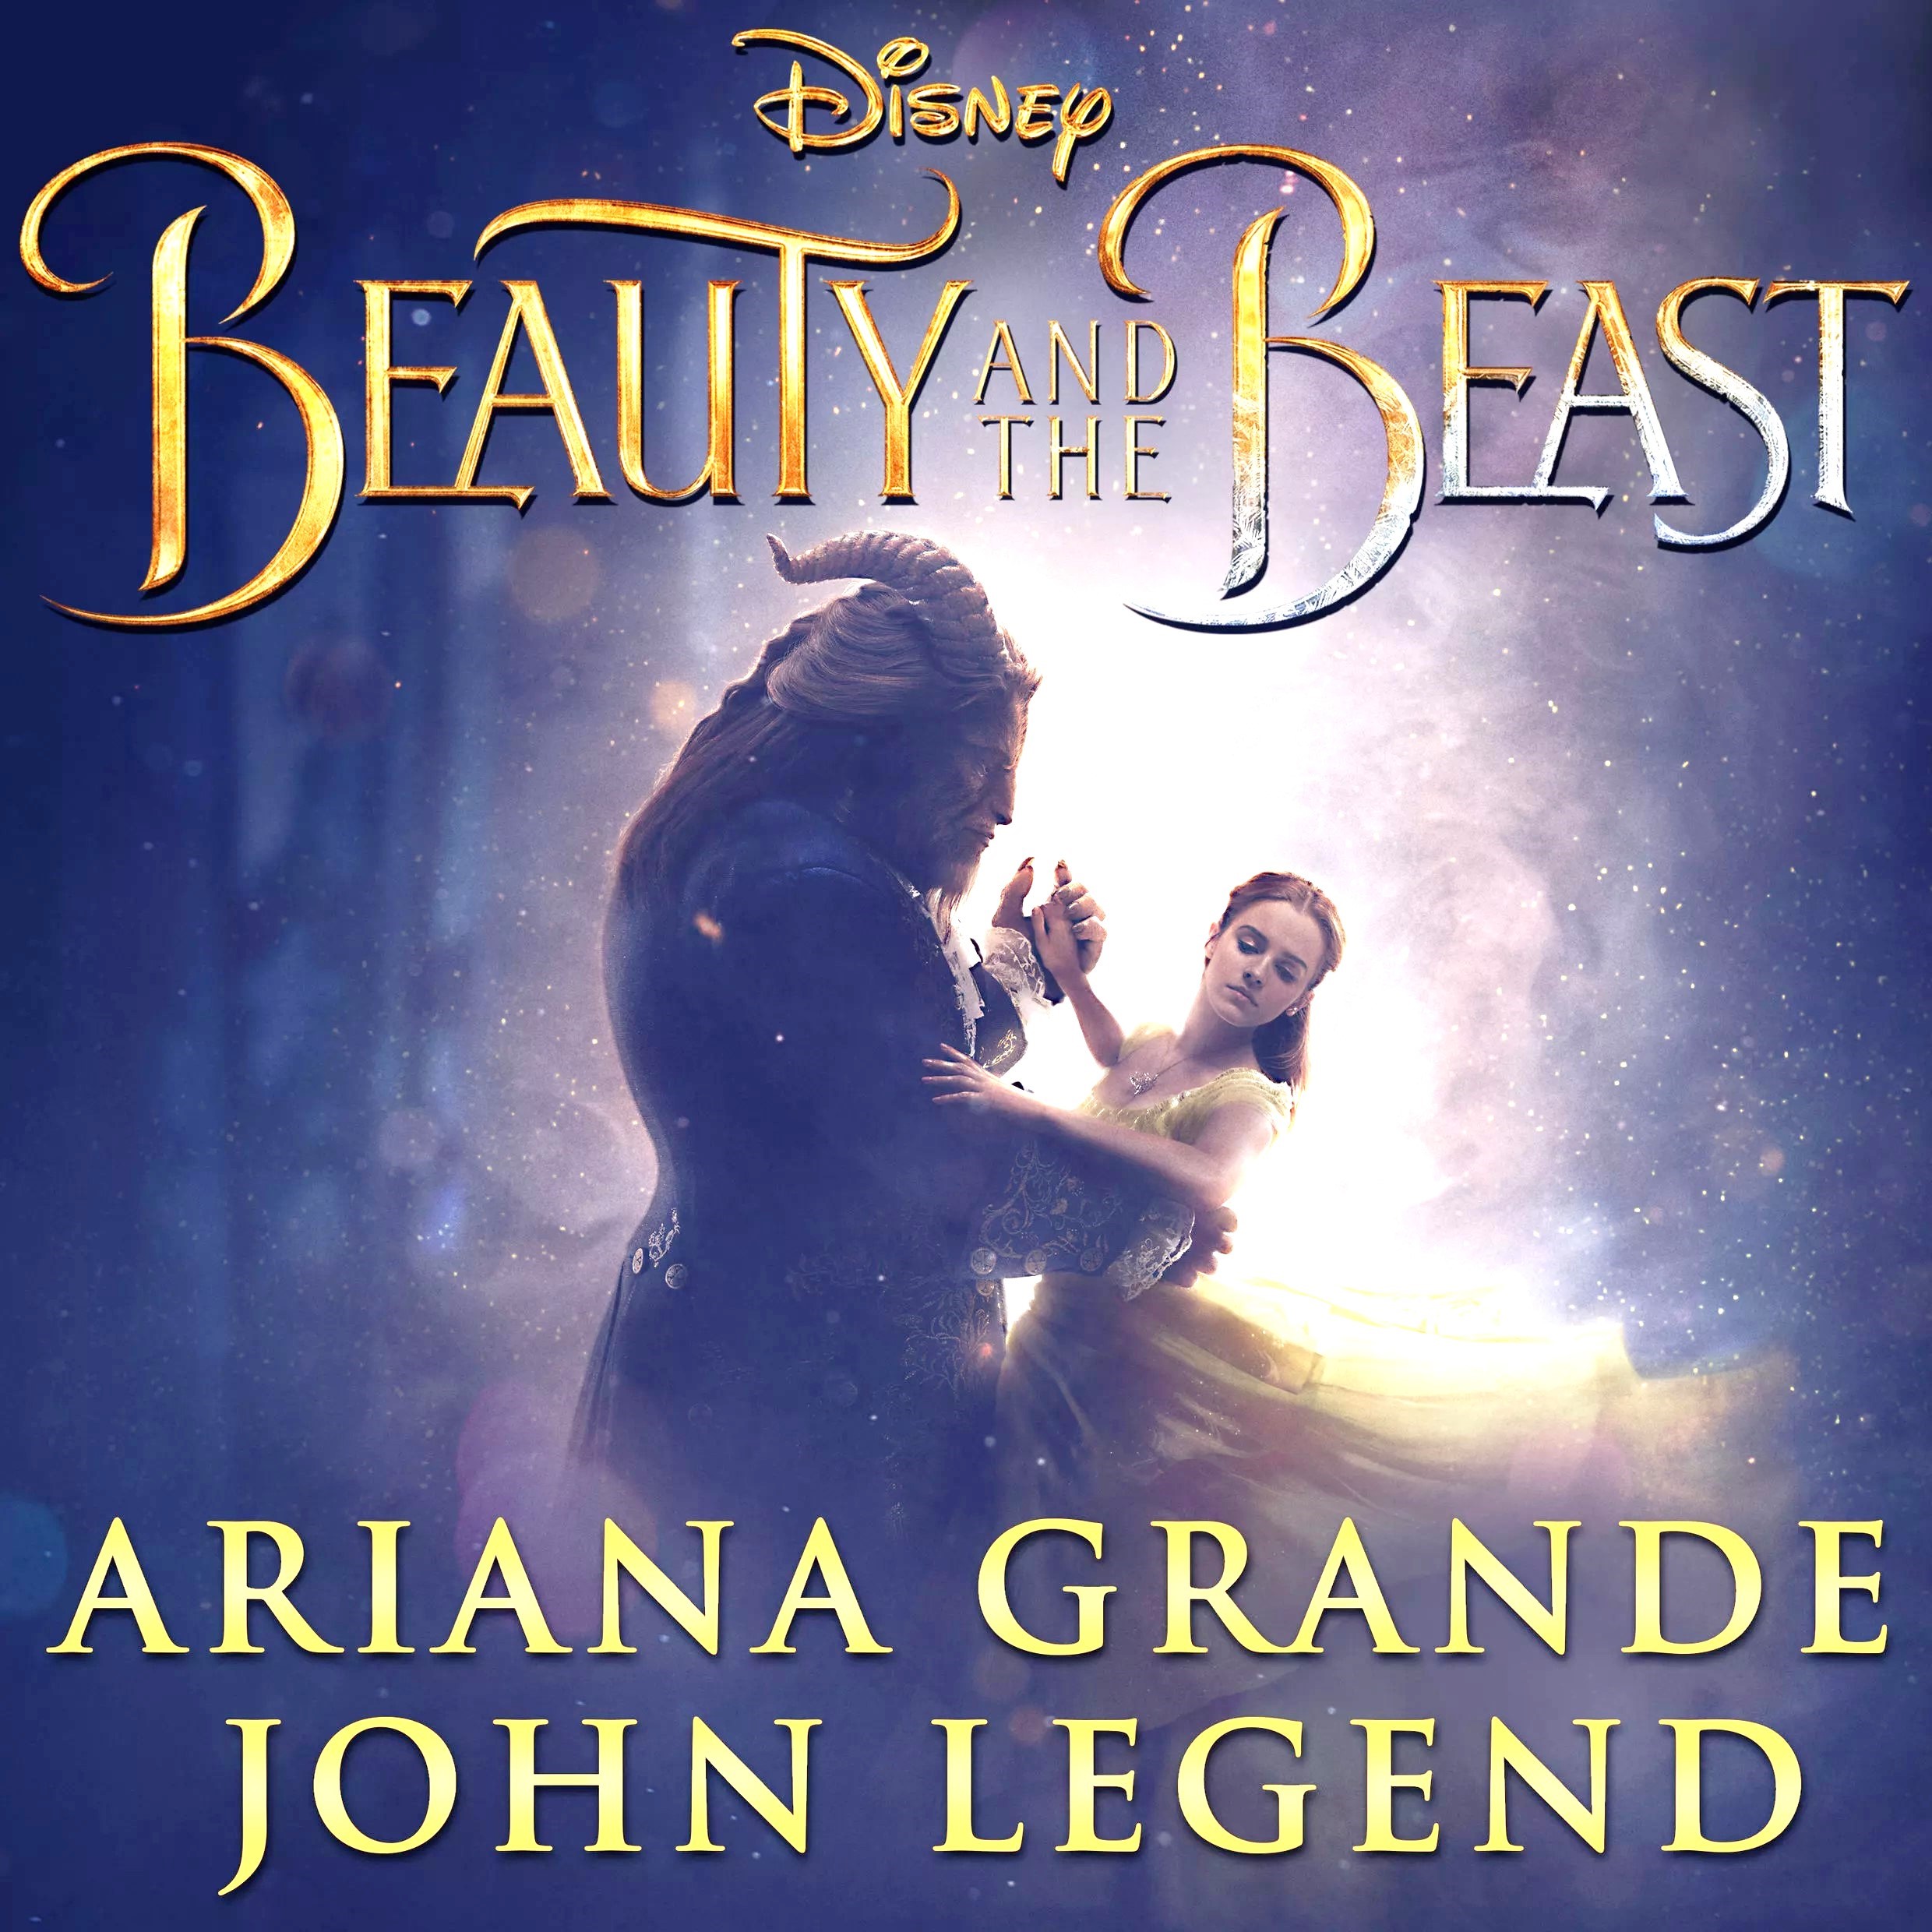 Ariana Grande ft. featuring John Legend Beauty And The Beast cover artwork